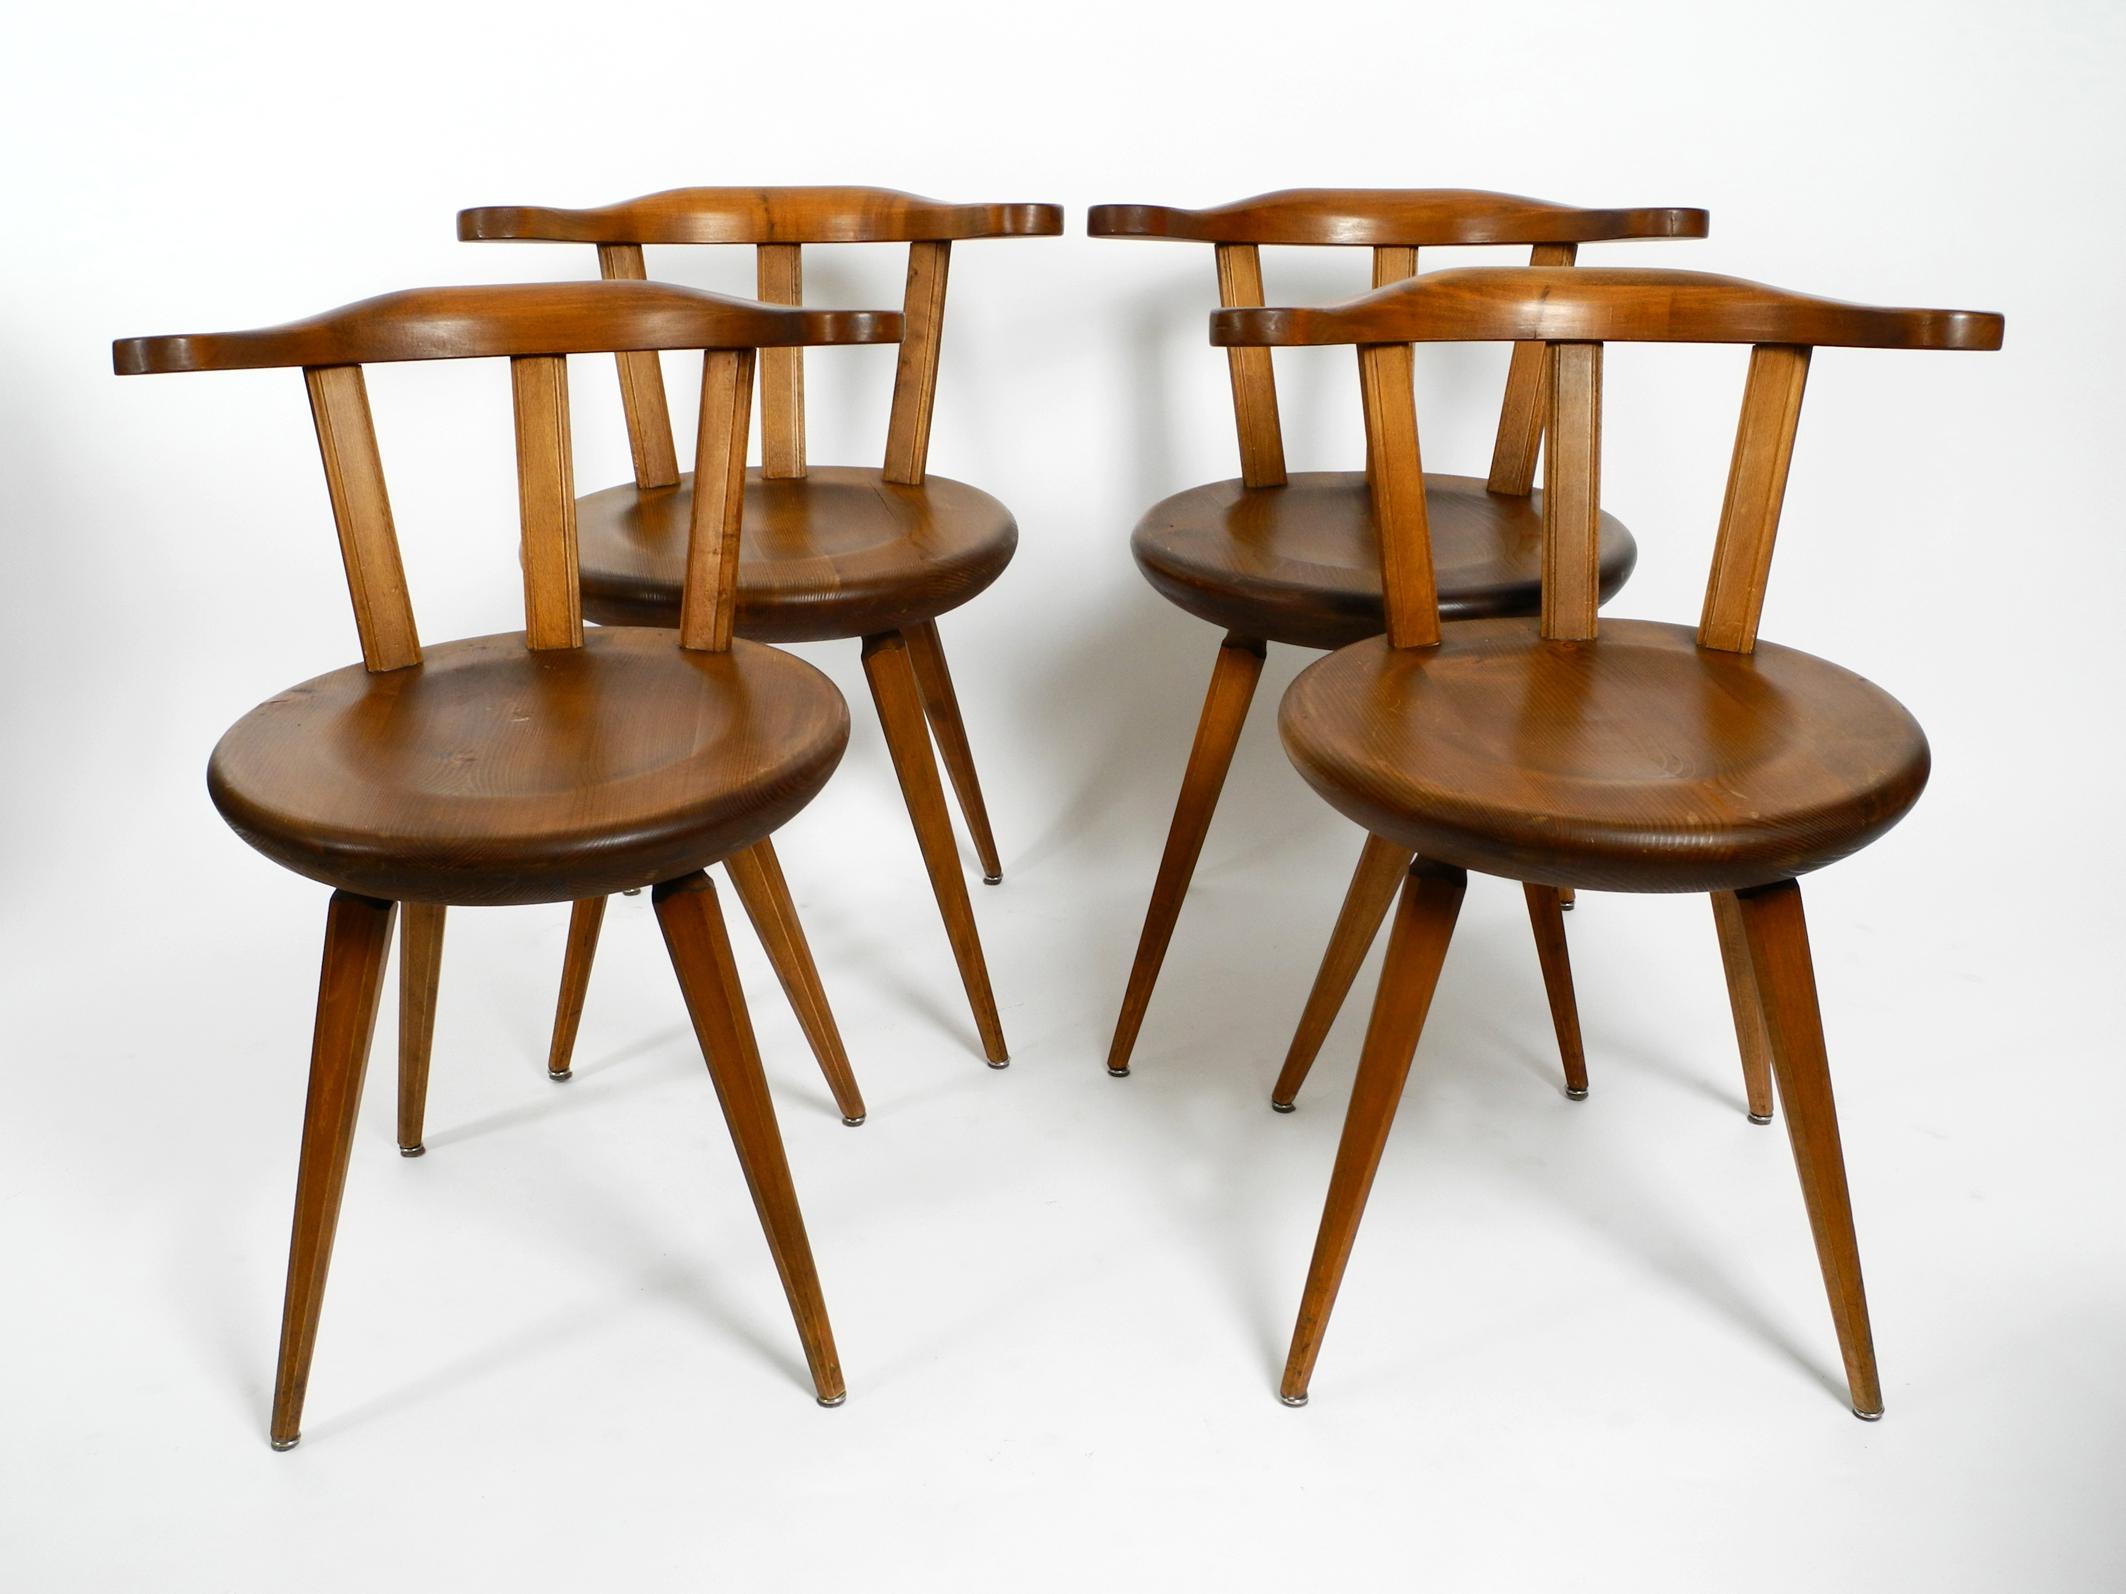 Mid-Century Modern Four Massive, Beautiful Mid-Century Solid Wood Sprouted Chairs with Low Backs